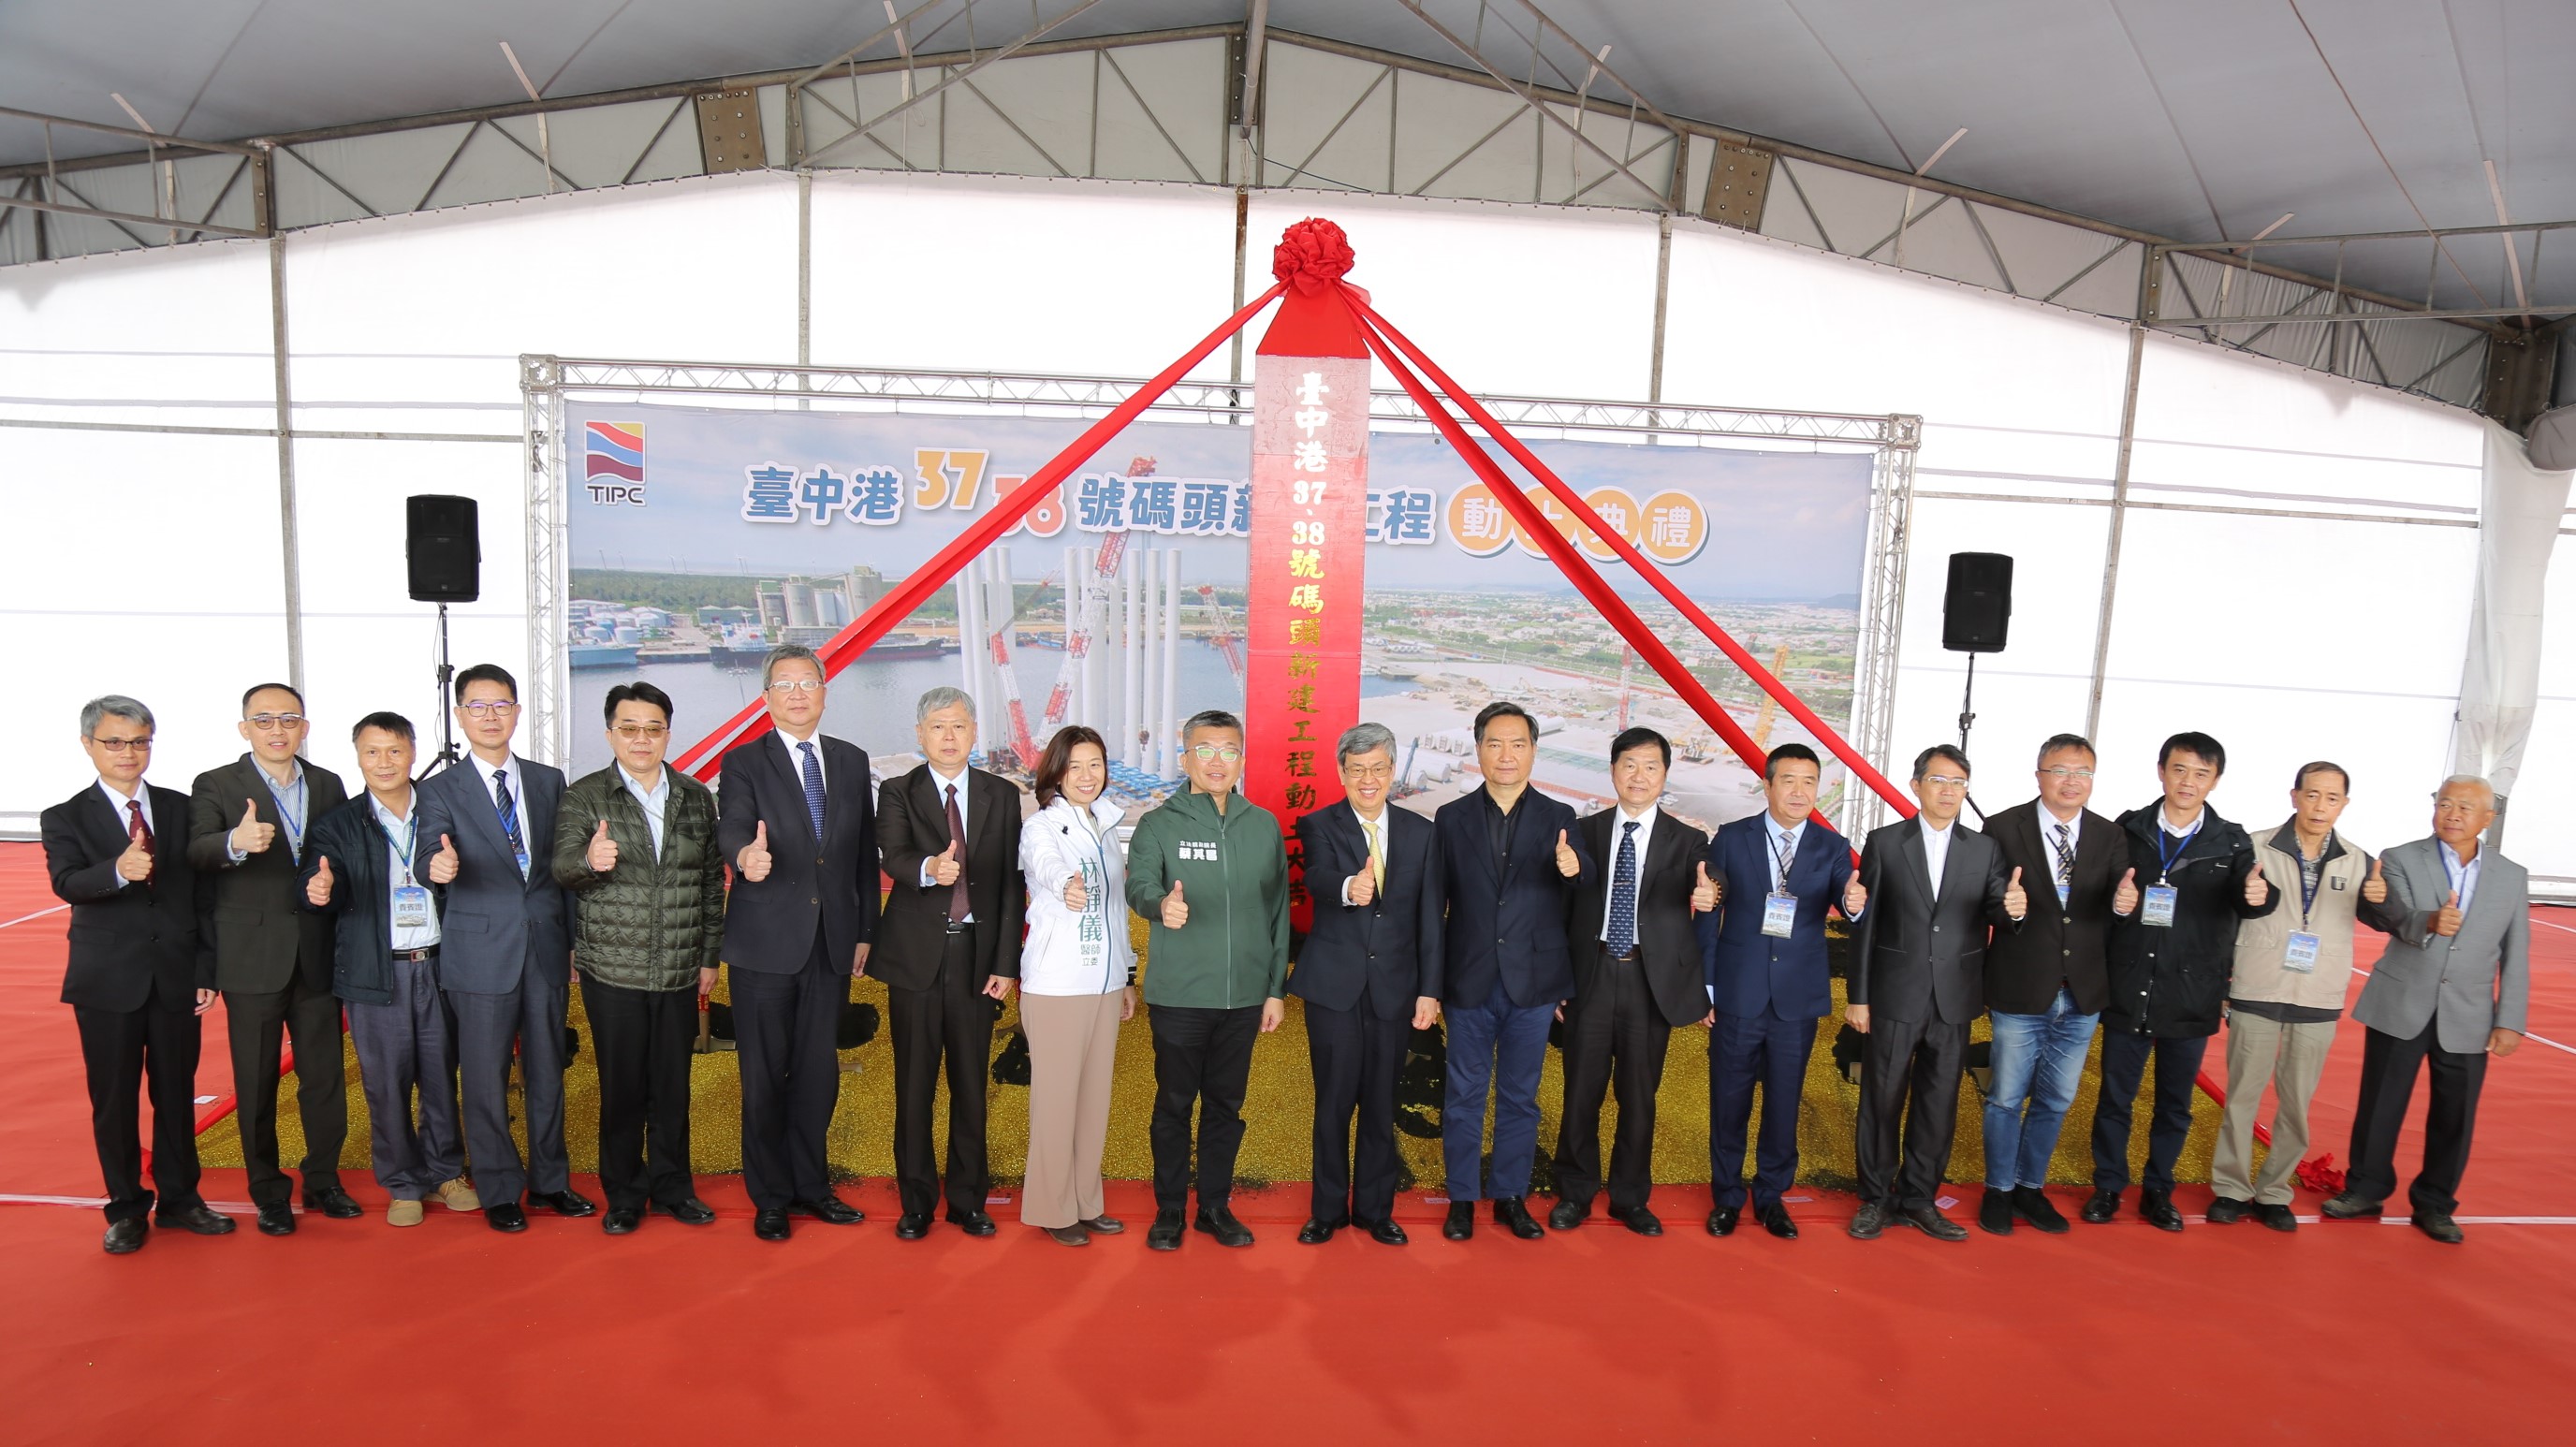 TIPC Allocates NT$3.5 Billion for Construction of Two New Heavy Lift Wharves at Port of Taichung to 